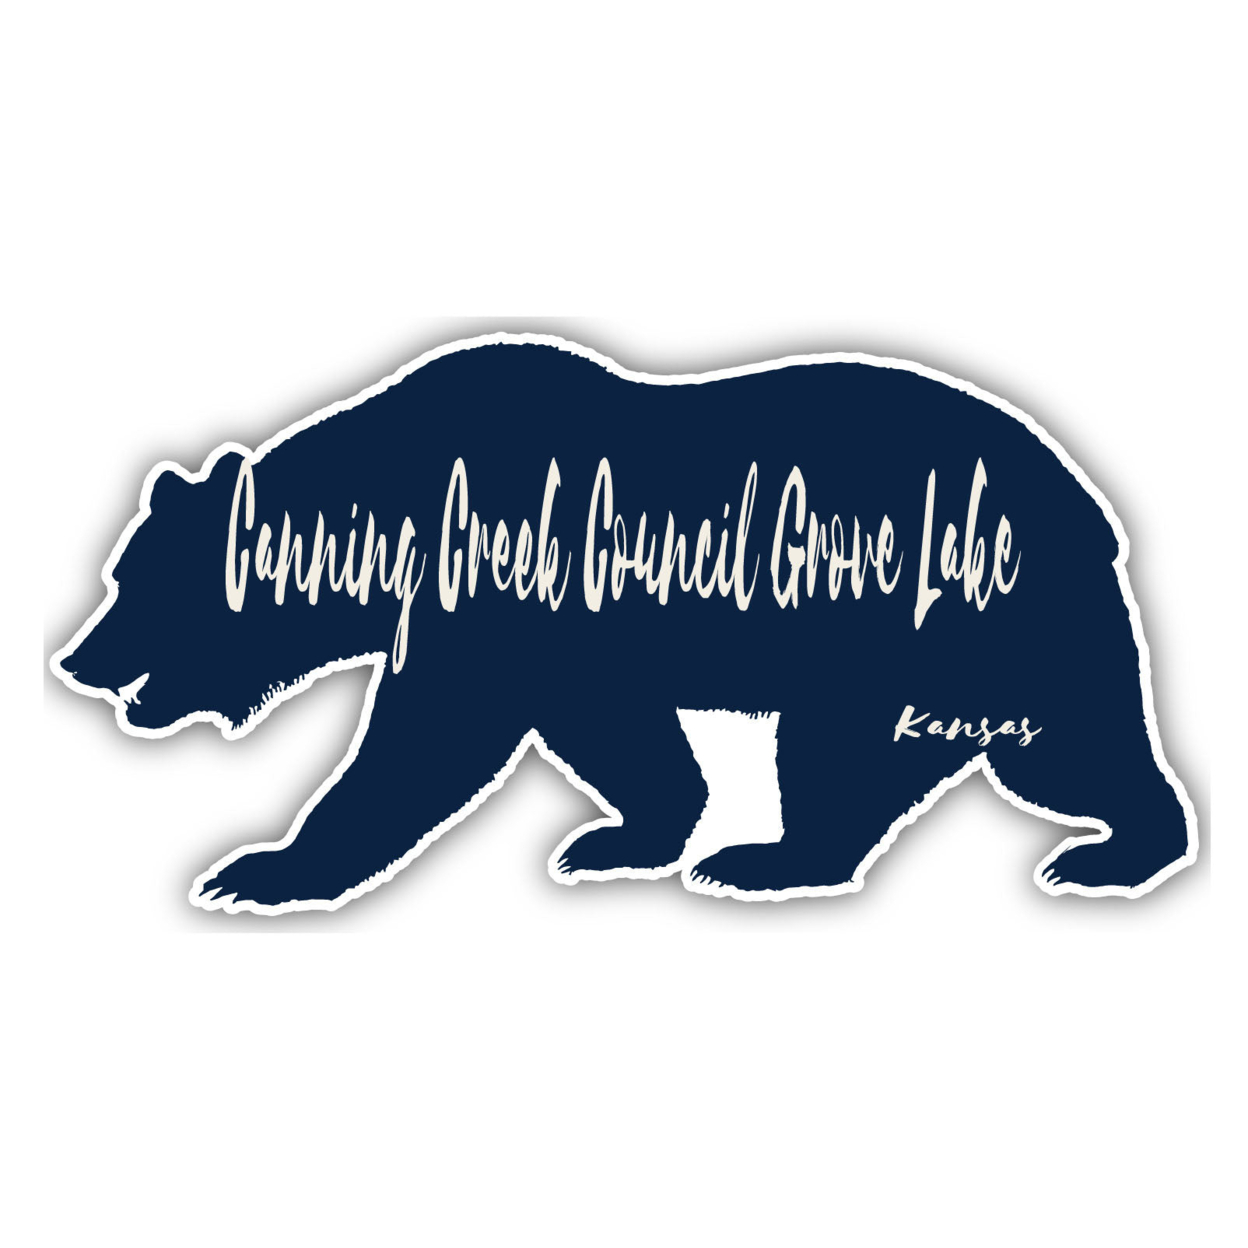 Canning Creek Council Grove Lake Kansas Souvenir Decorative Stickers (Choose Theme And Size) - 4-Pack, 4-Inch, Bear